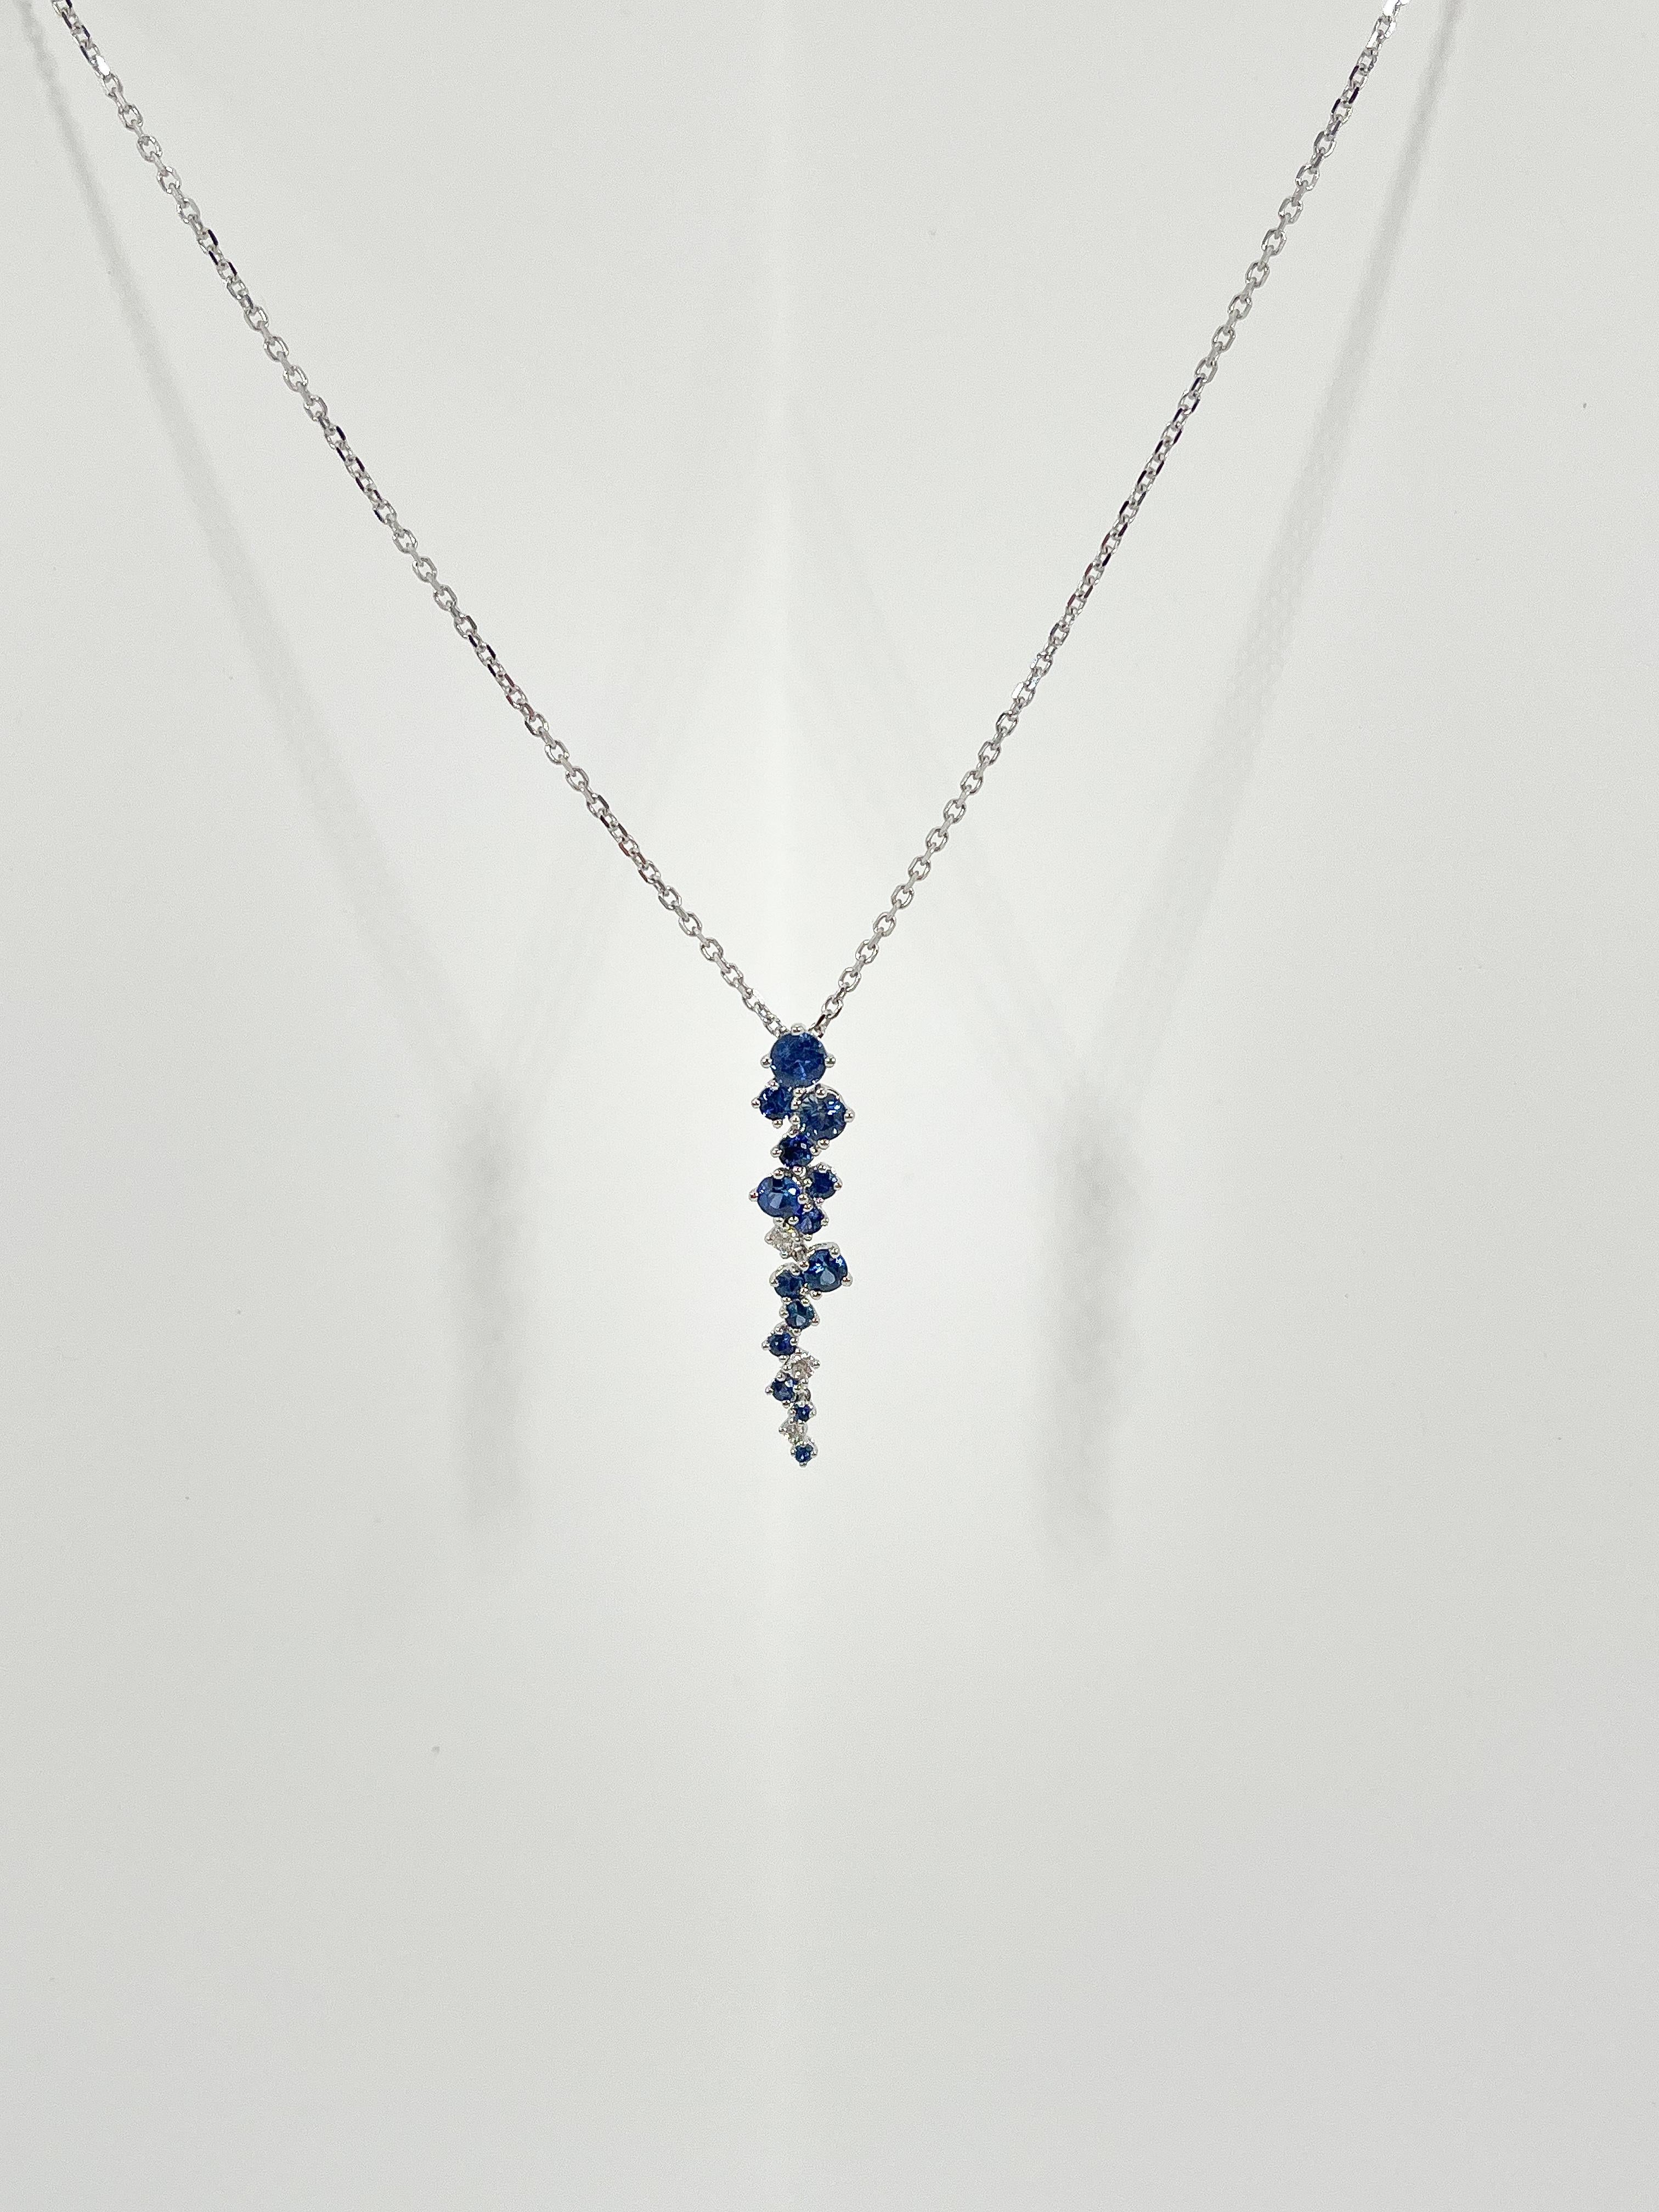 18k white gold 1.11 CTW sapphire and diamond pendant necklace. This necklace has a cluster of 14 sapphires and 3 diamonds of different sizes. The pendant measures 5.1 x 29.4 mm The necklace is 18 inches long and weighs 3.6 grams. 